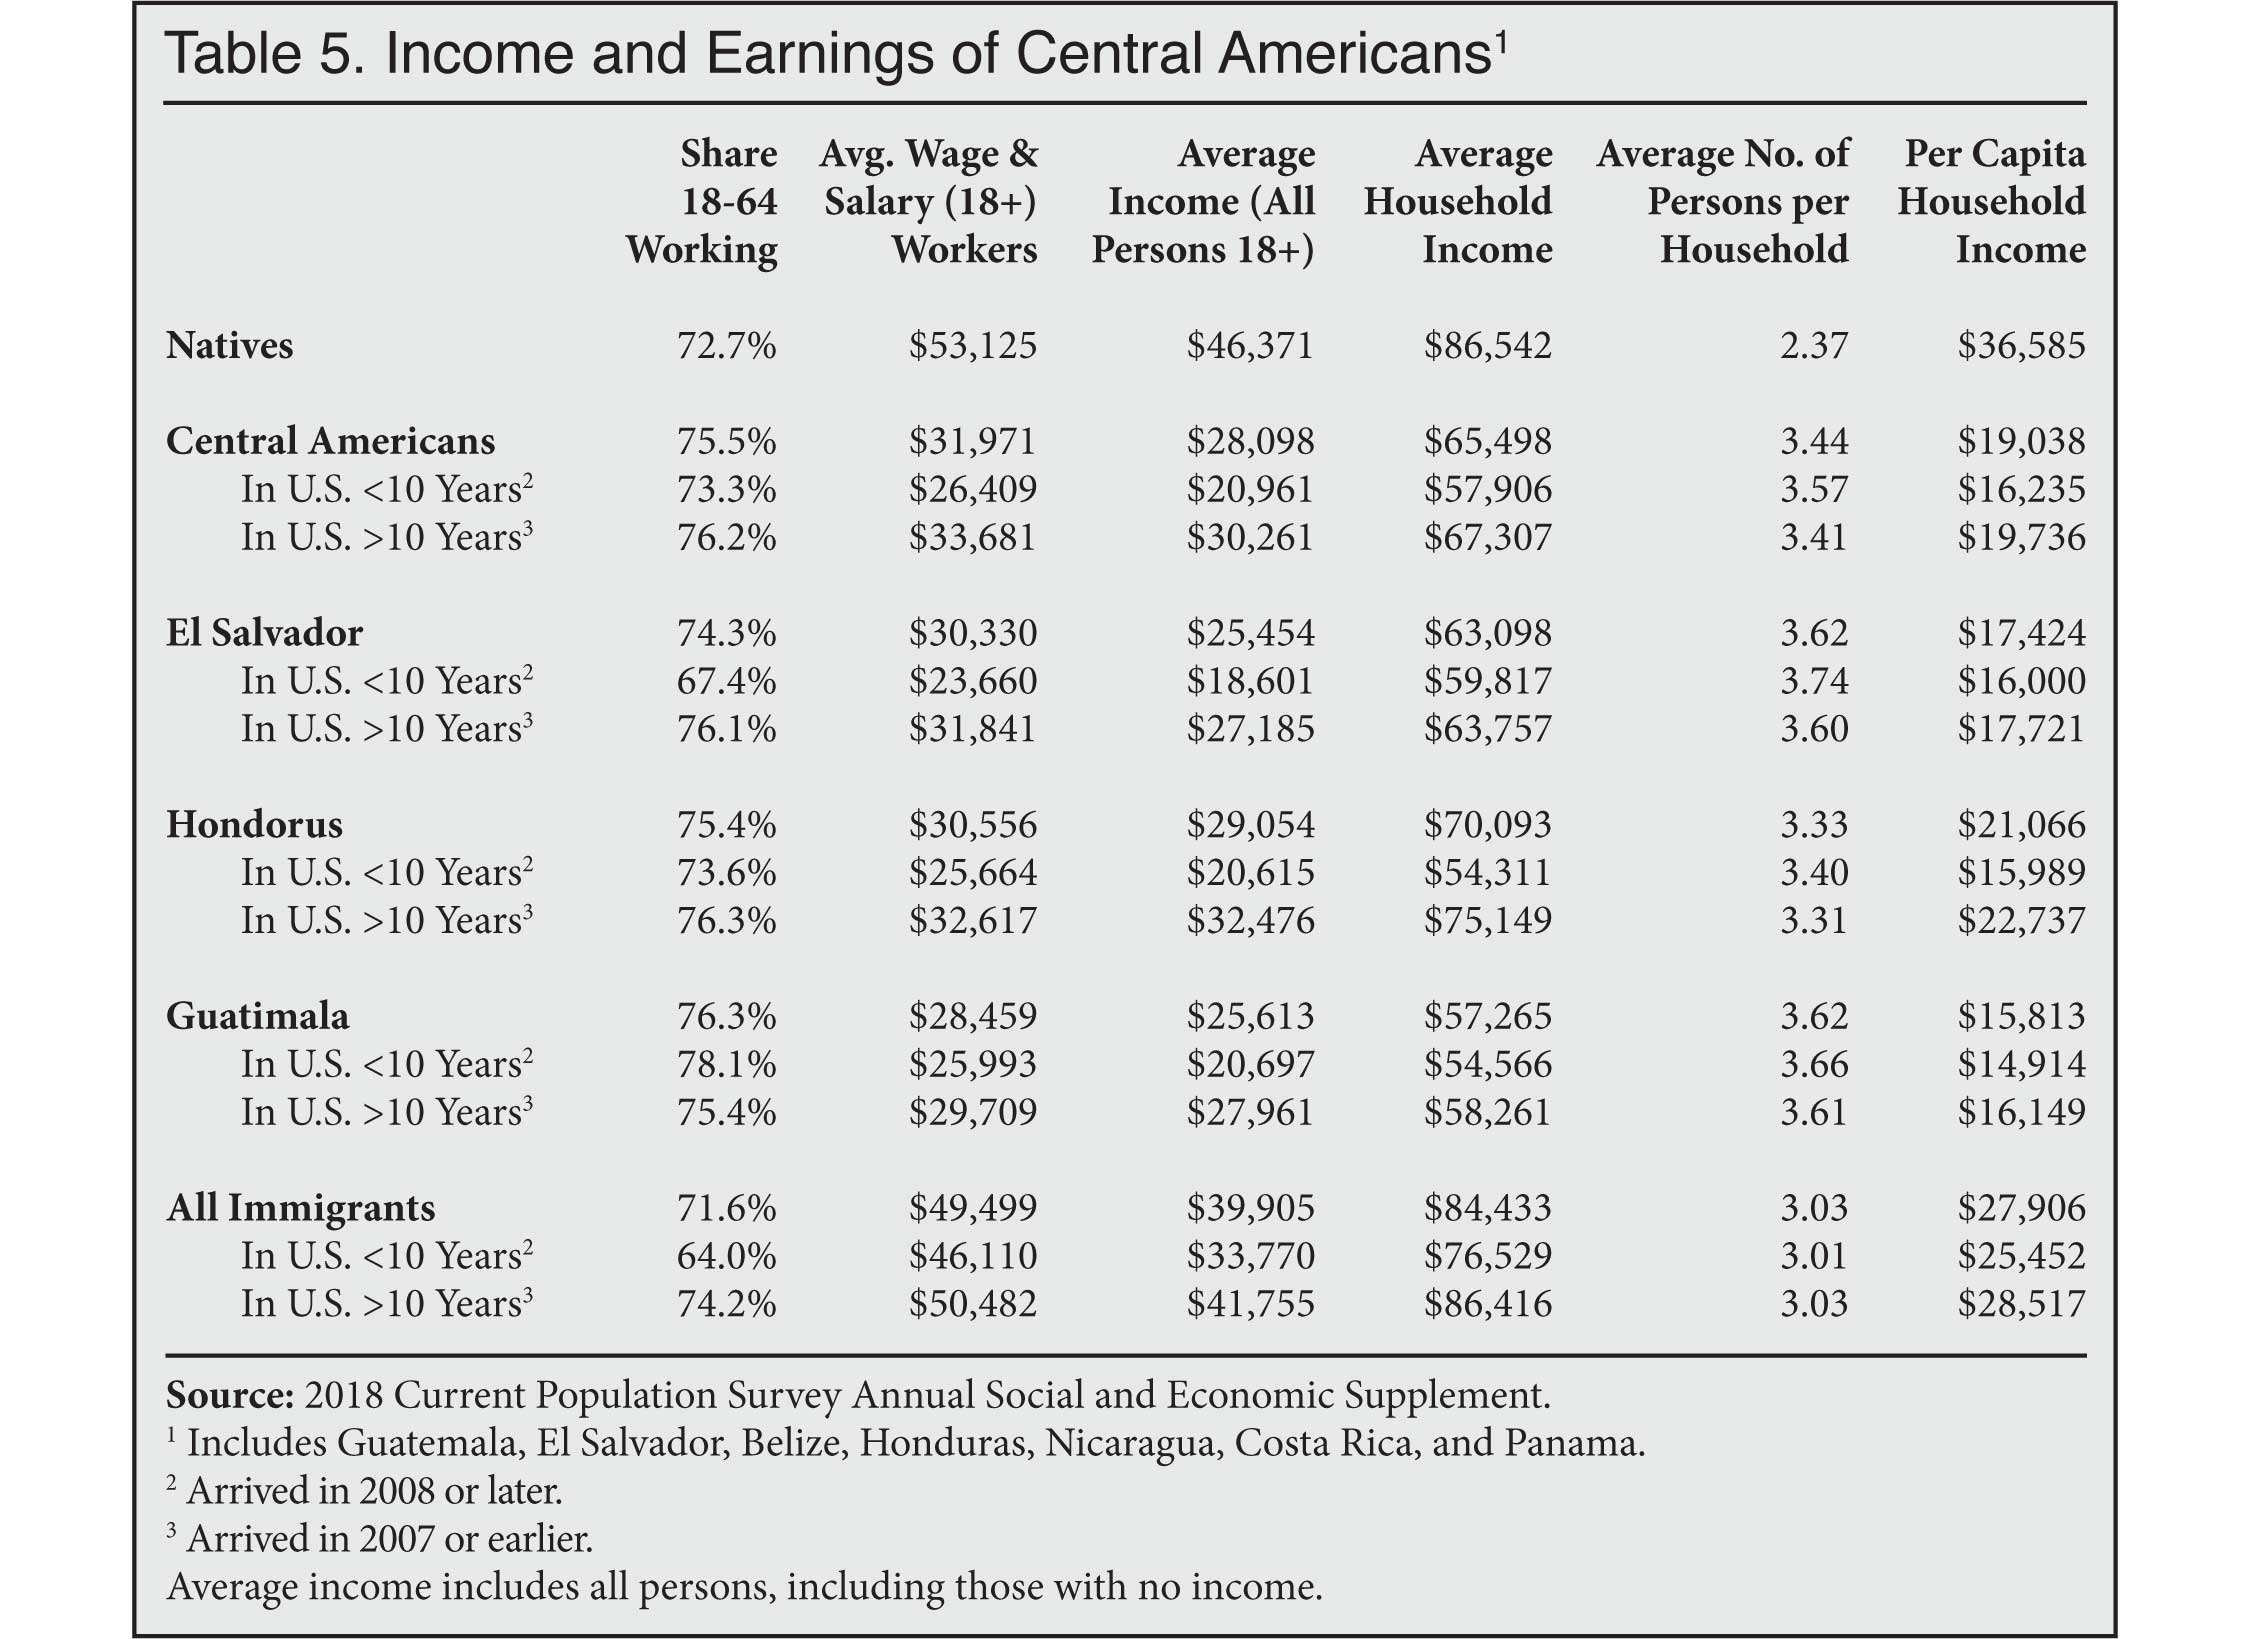 Table: Income and Earnings of Central Americans